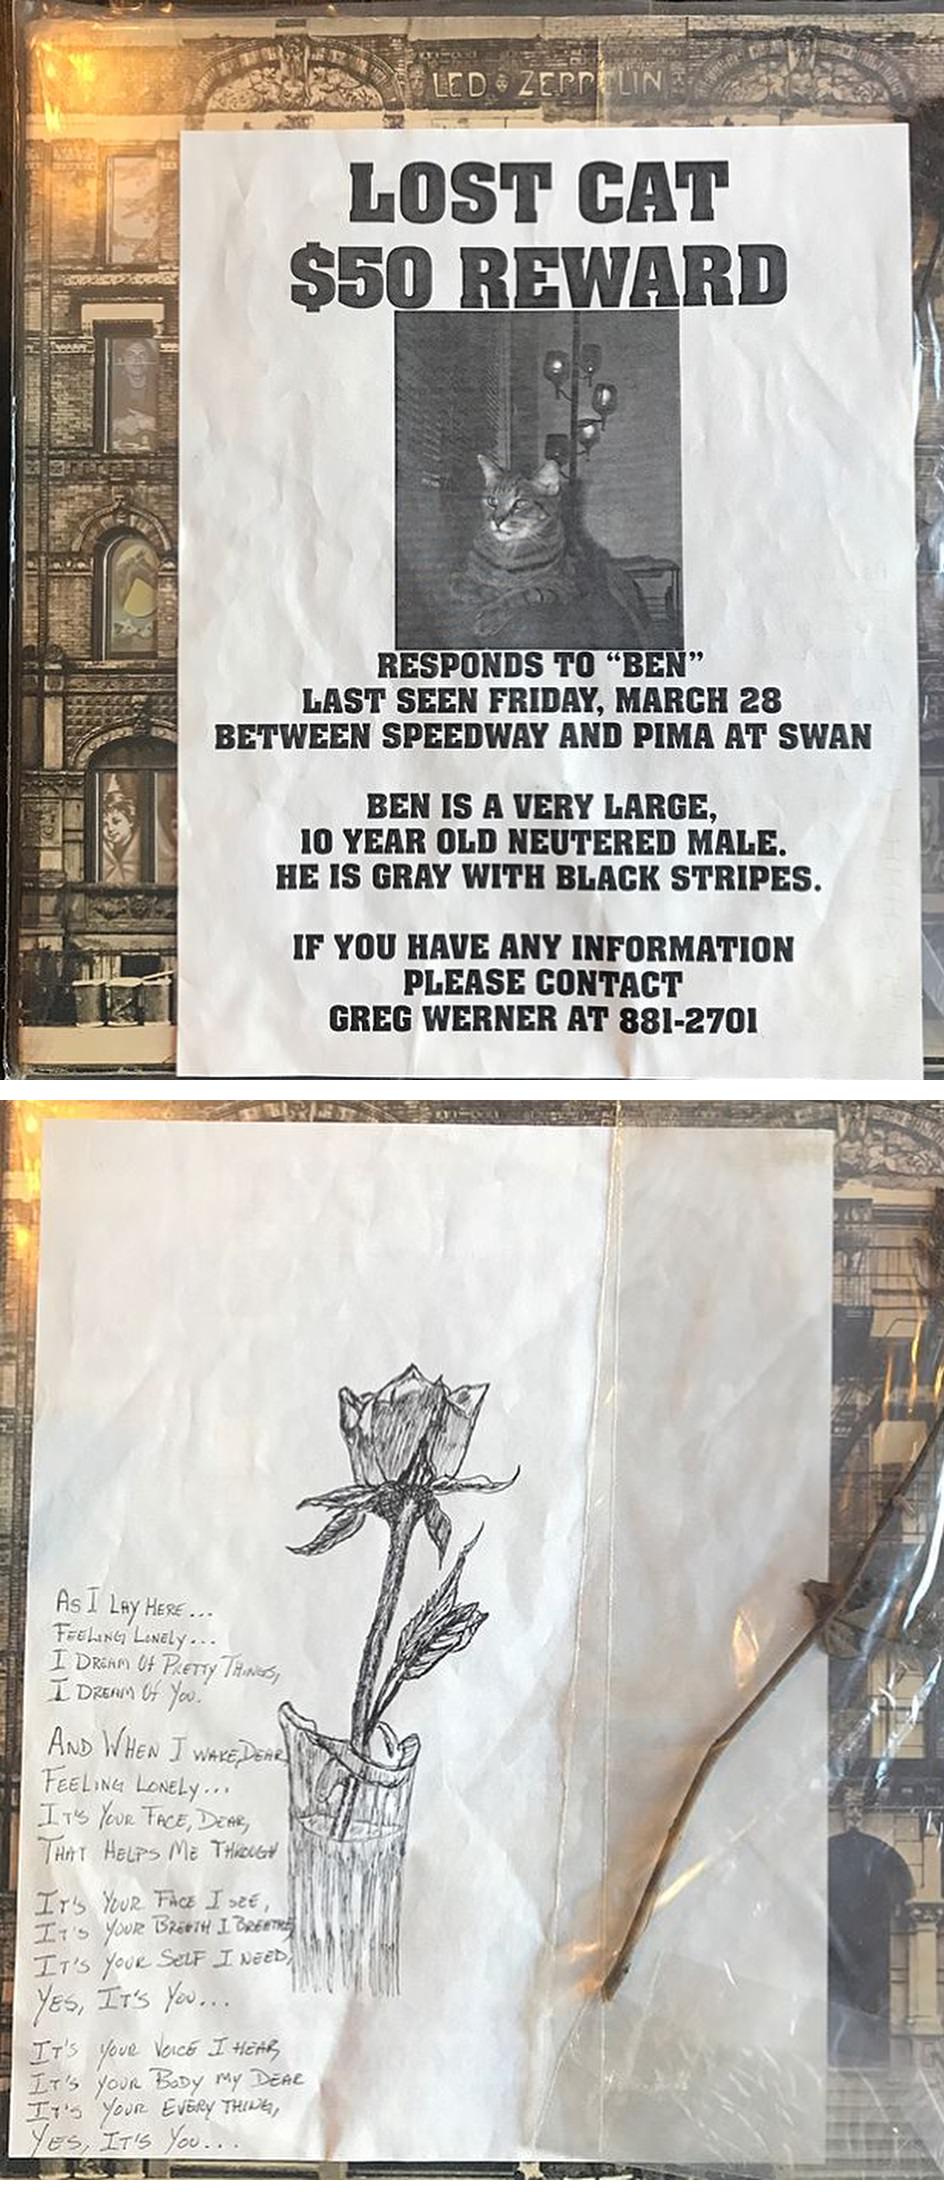 Found a copy of Led Zeppelin ‘Physical Graffiti’ with some sad inserts! A MISSING CAT poster for poor little “Ben” and a dried rose and poem / drawing. Meow.